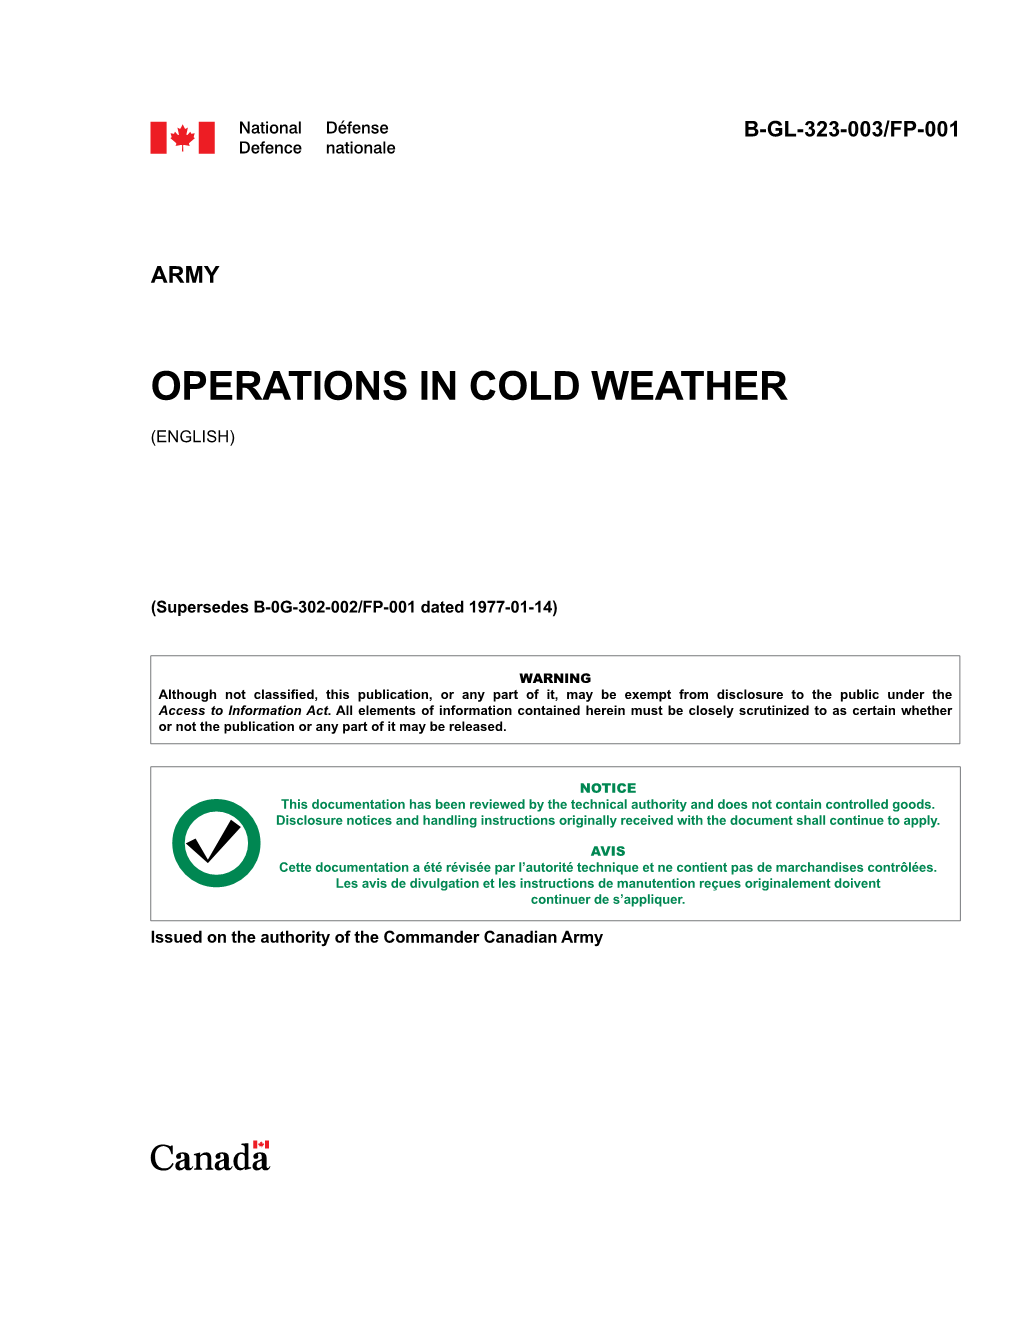 Operations in Cold Weather (English)